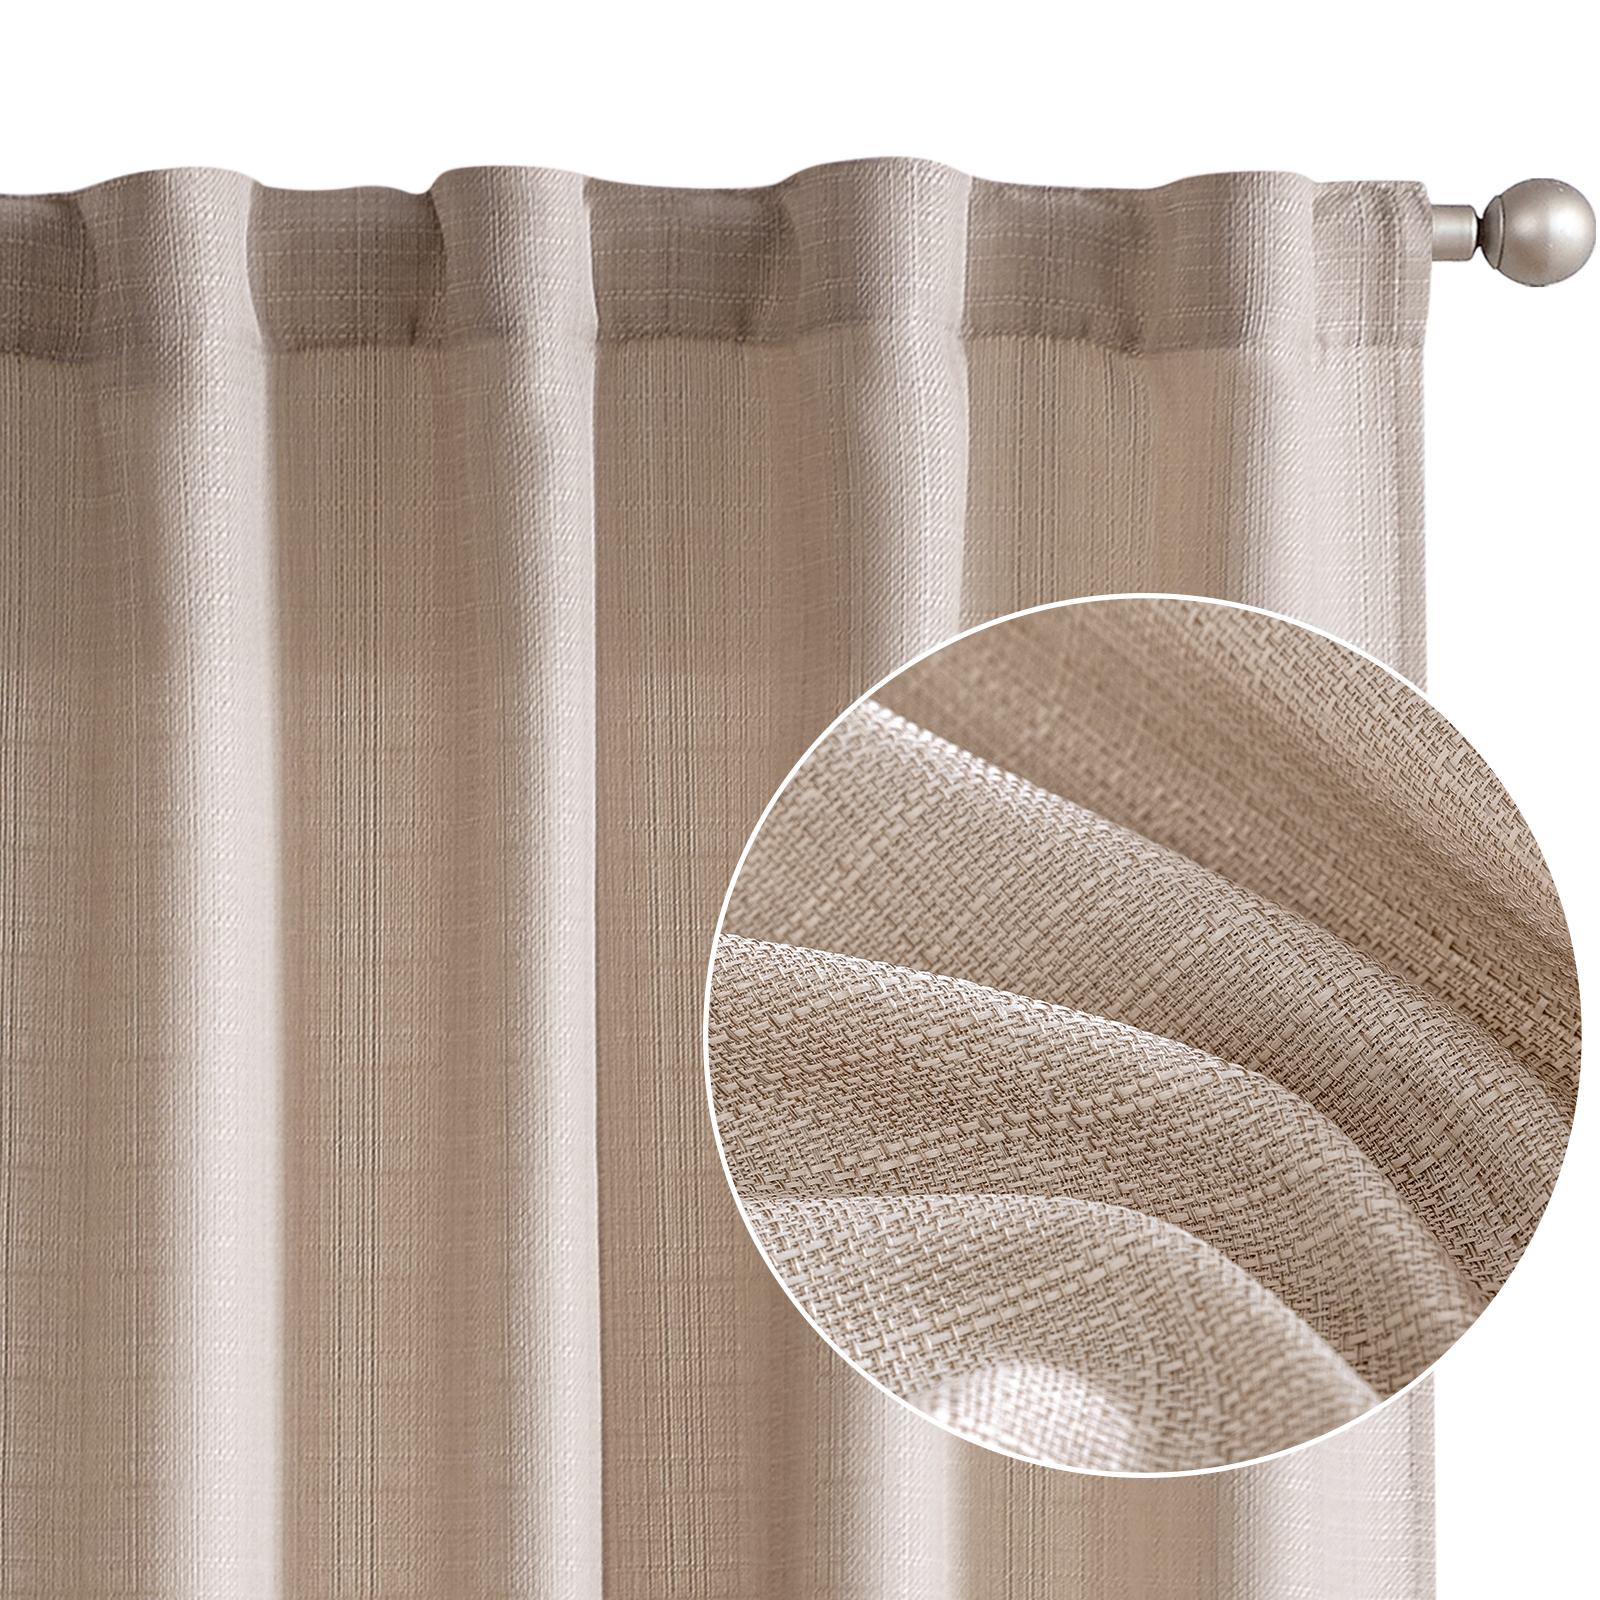 Curtainking Taupe Curtains for Living Room 63 inches Linen Textured Curtains Light Filtering Back Tab Curtains Casual Weave Back Tab Drapes 2 Panels - image 1 of 8